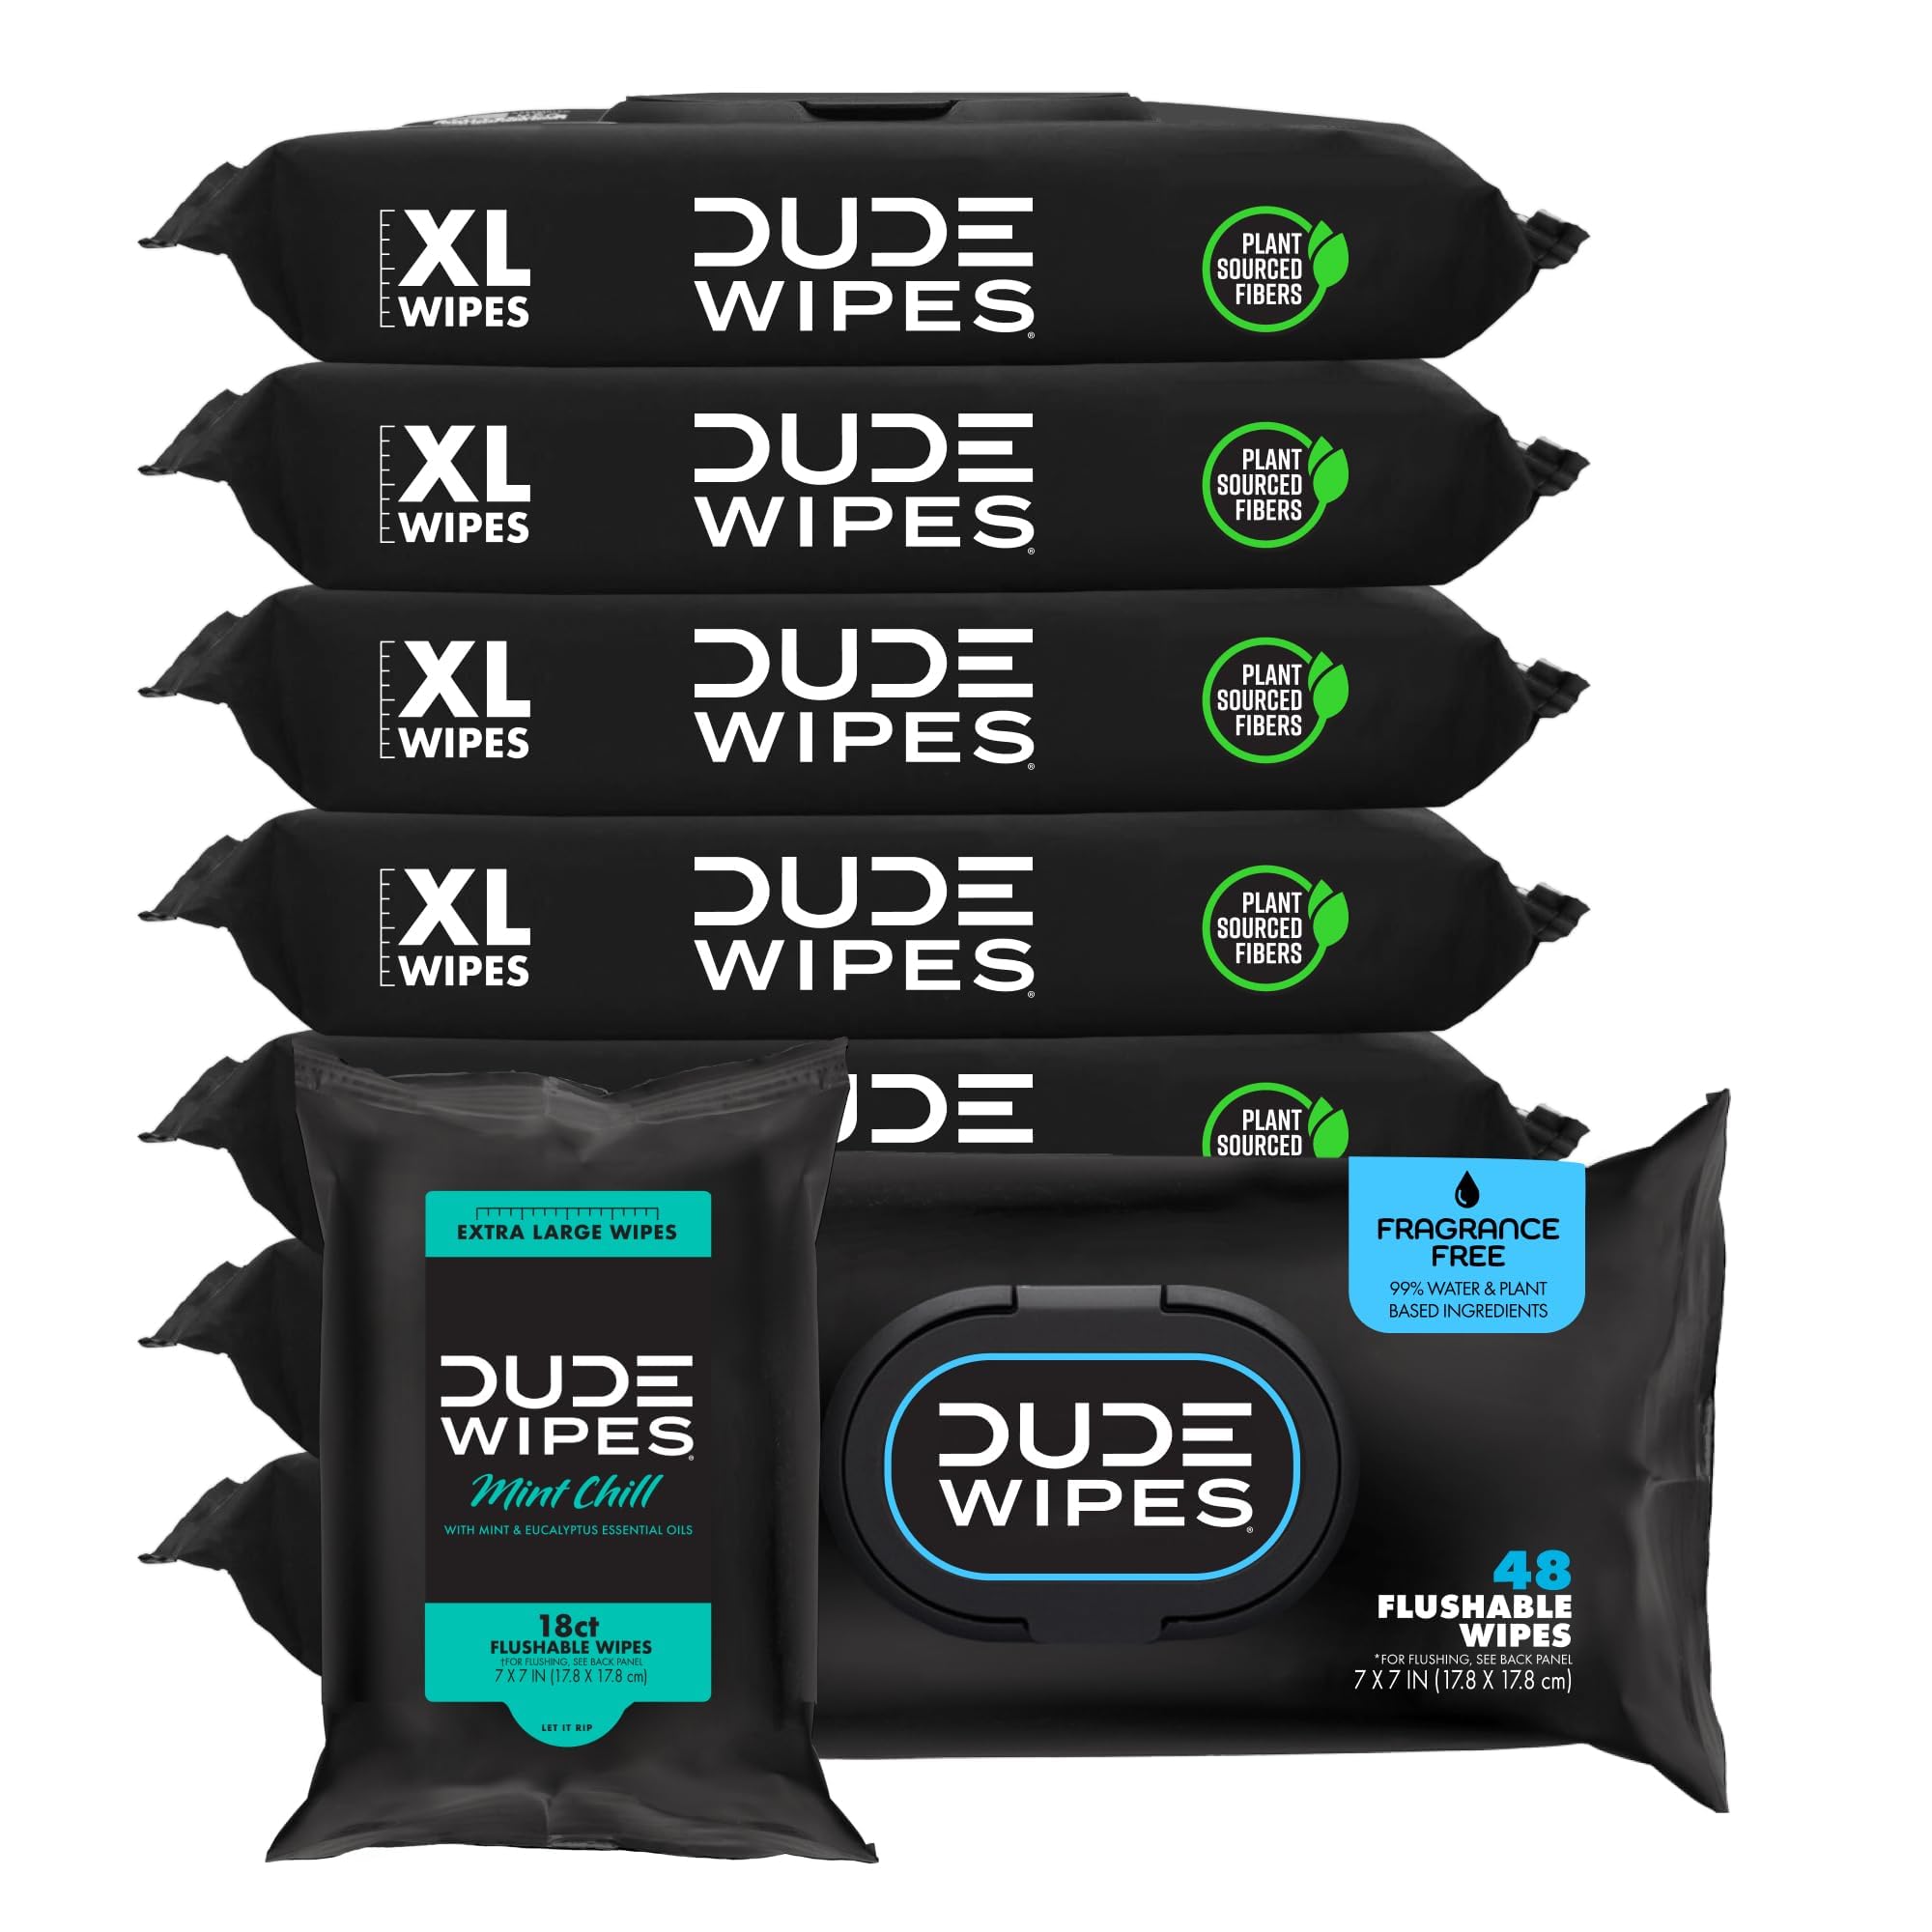 DUDE Wipes - Flushable Wipes - Unscented 8 Pack + Mint Travel Pack, 402 Wipes - Extra Large Dispenser Wet Wipes with Vitamin E & Aloe For Men - Septic and Sewer Safe